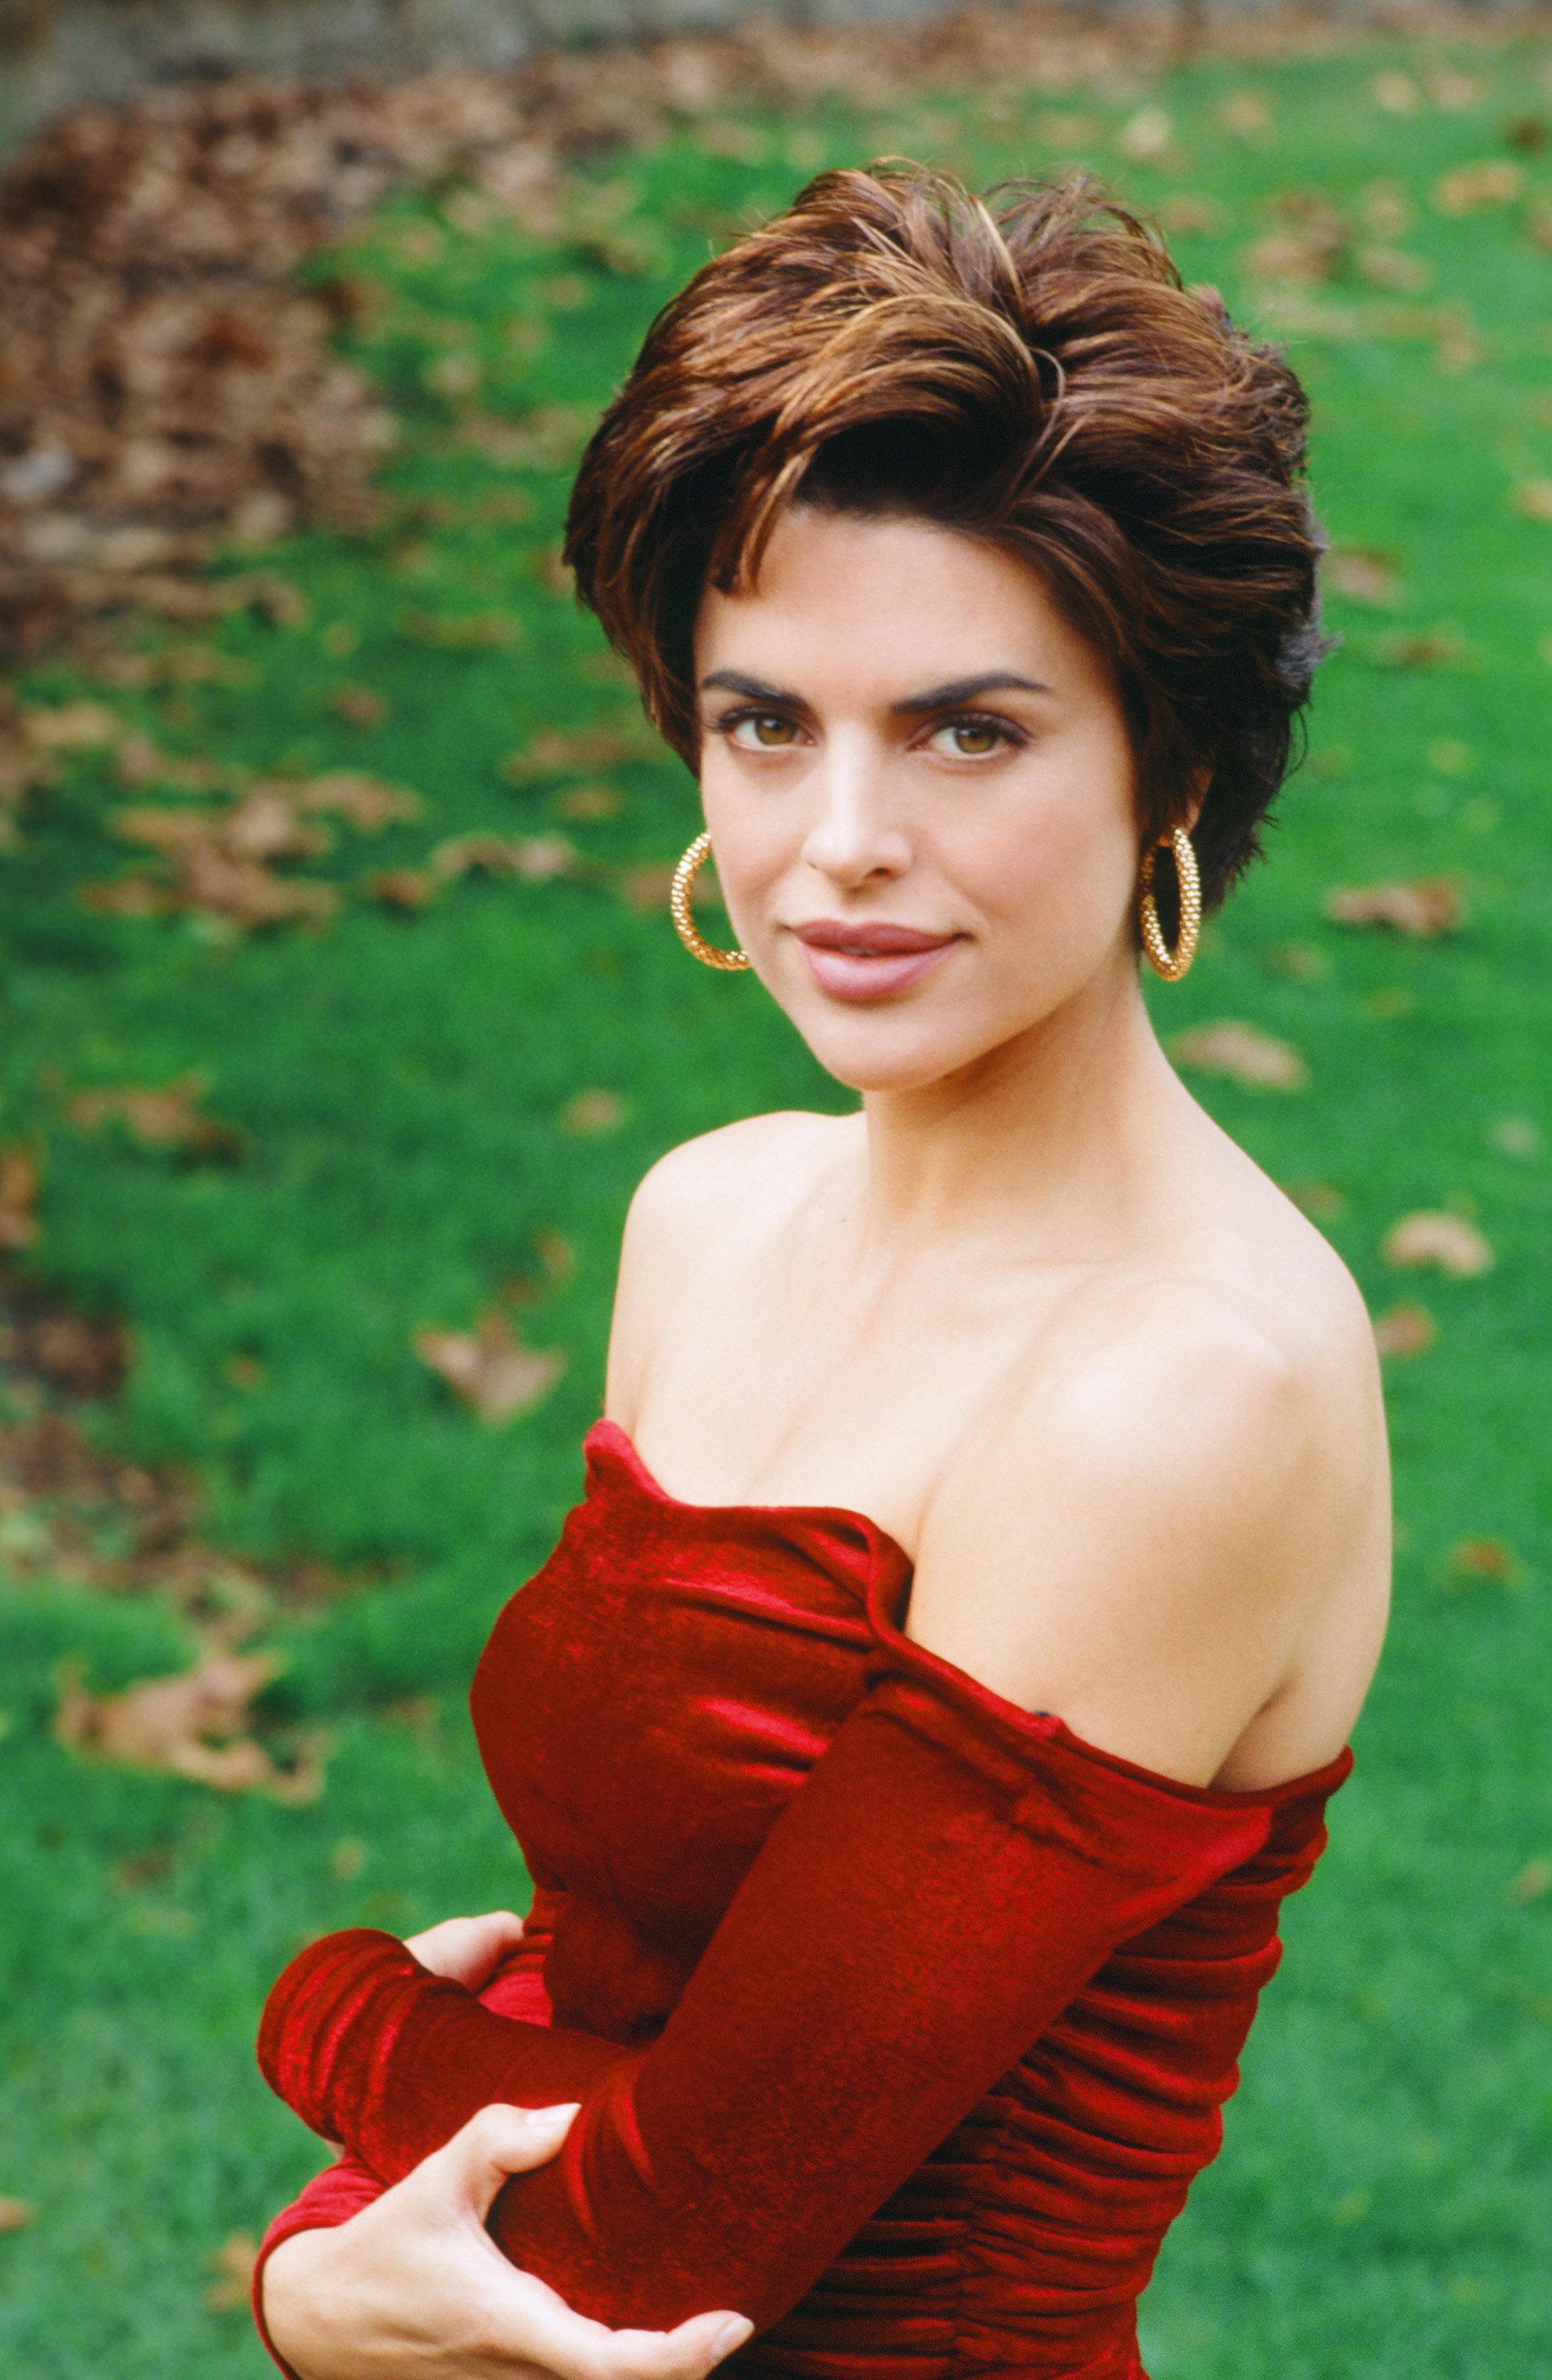 Lisa Rinna posing as Billie Reed, the character she originated in 1992 on 'Days of Our Lives'